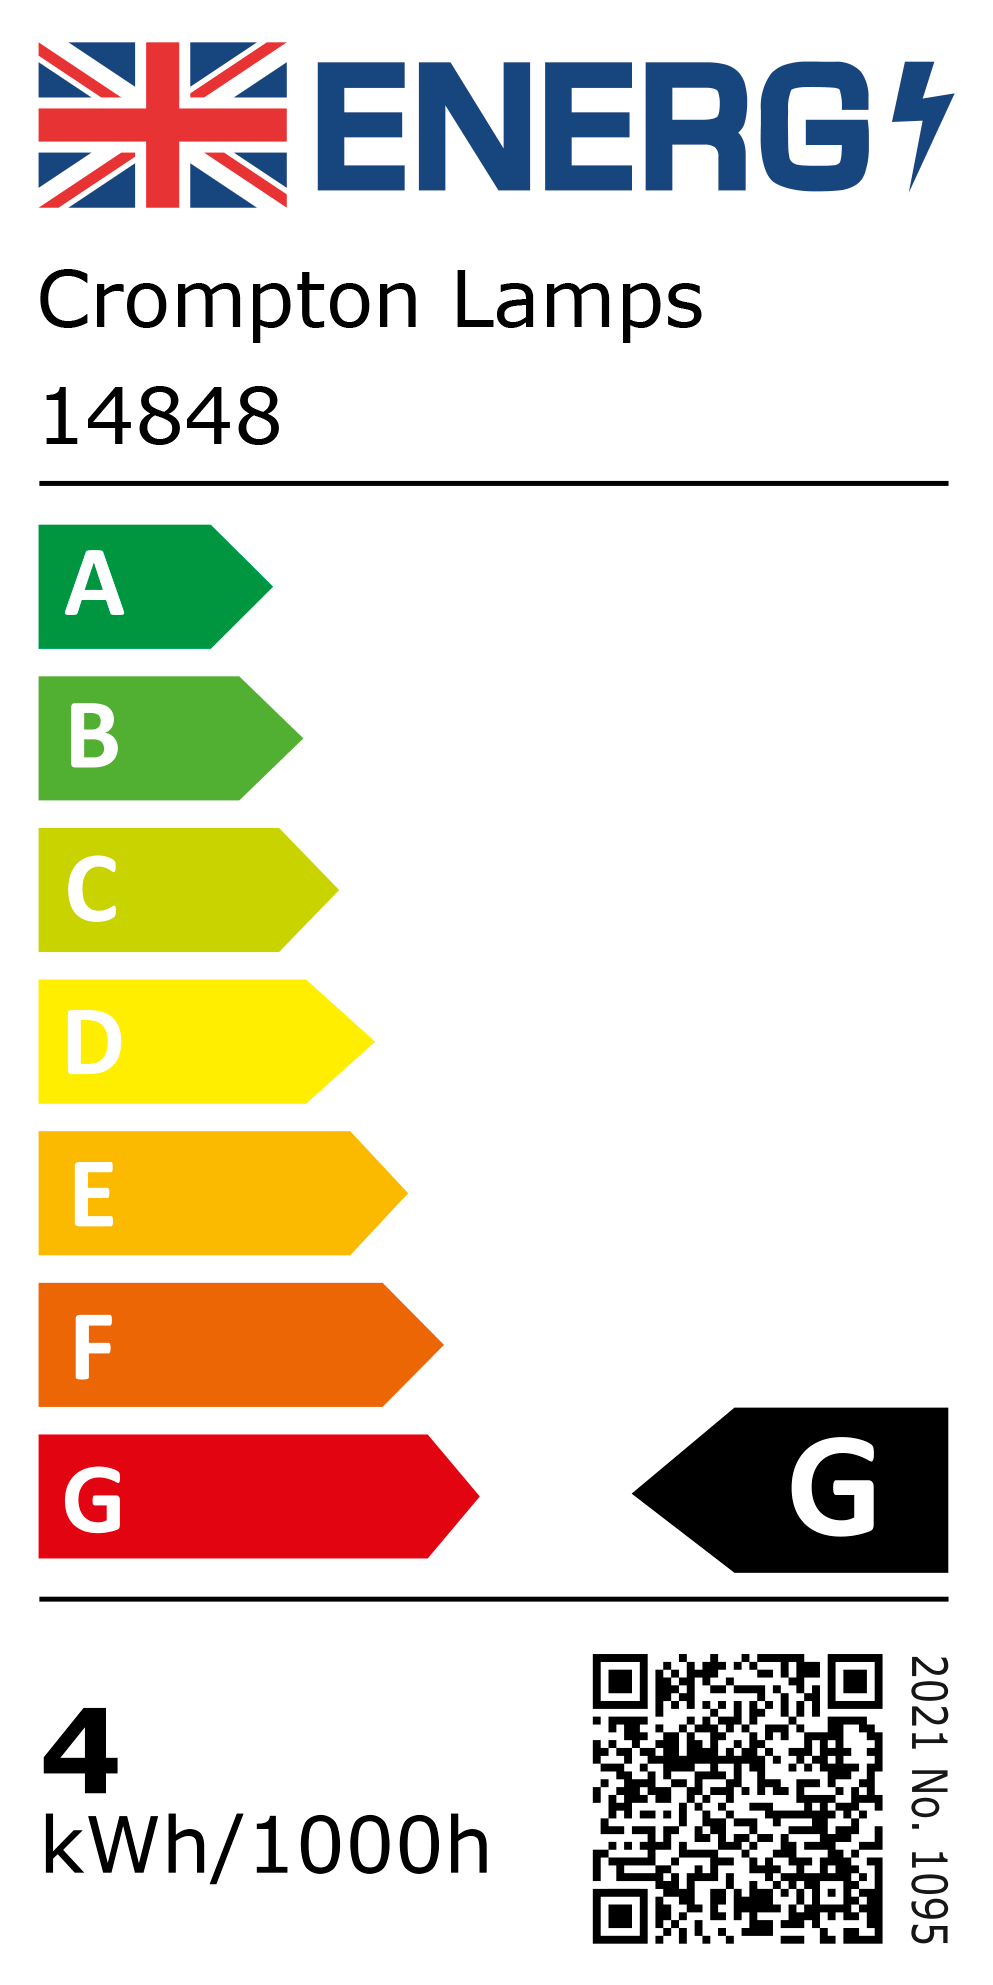 New 2021 Energy Rating Label: Stock Code 14848